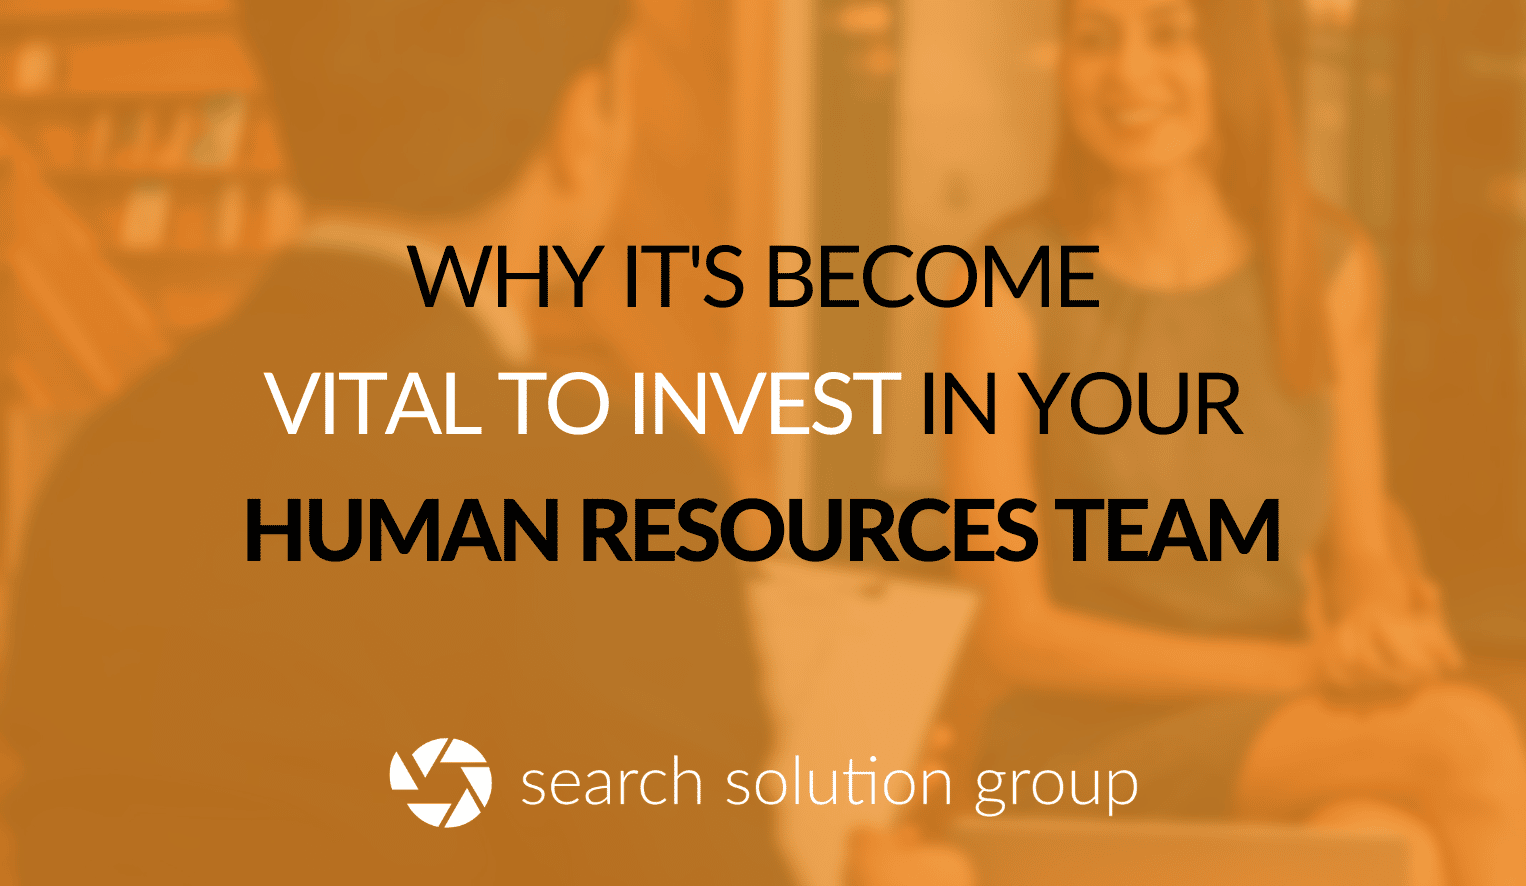 Why it’s Become Vital to Invest in Your Human Resources Team